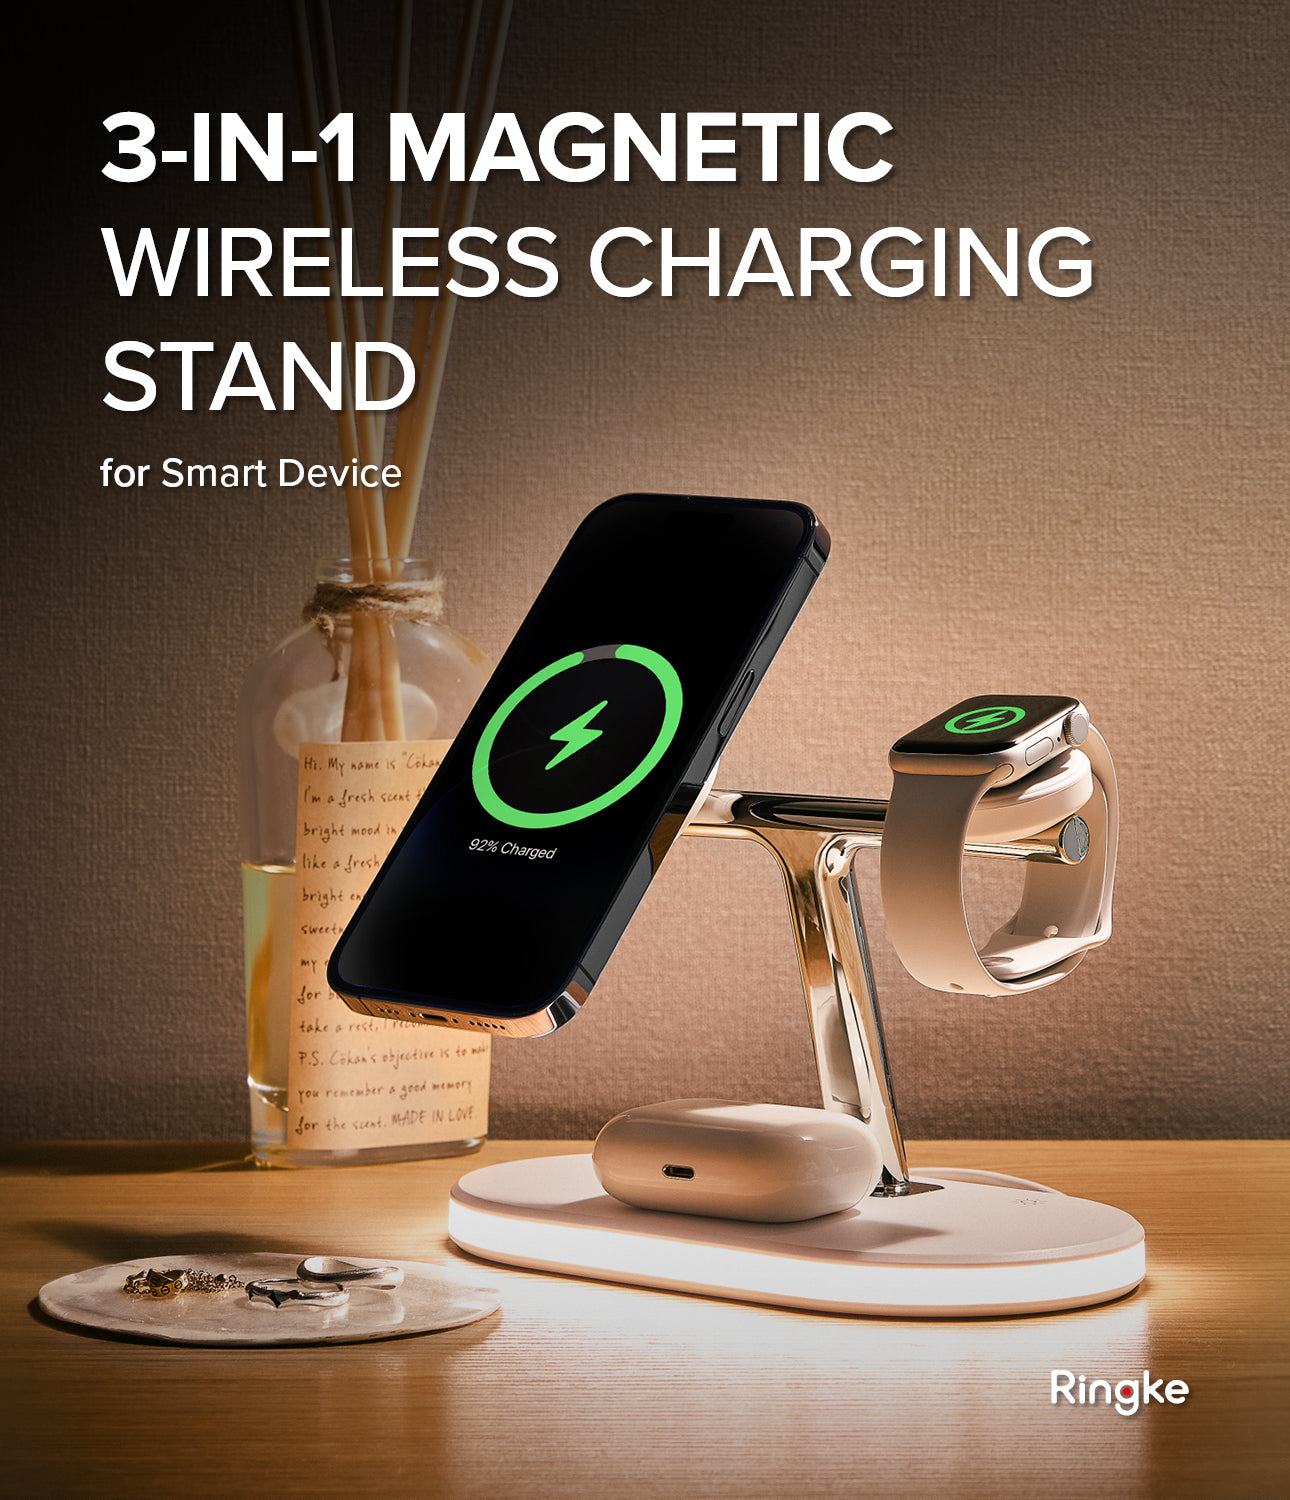 Ringke 3-in-1 Wireless Charger Stand - By Ringke